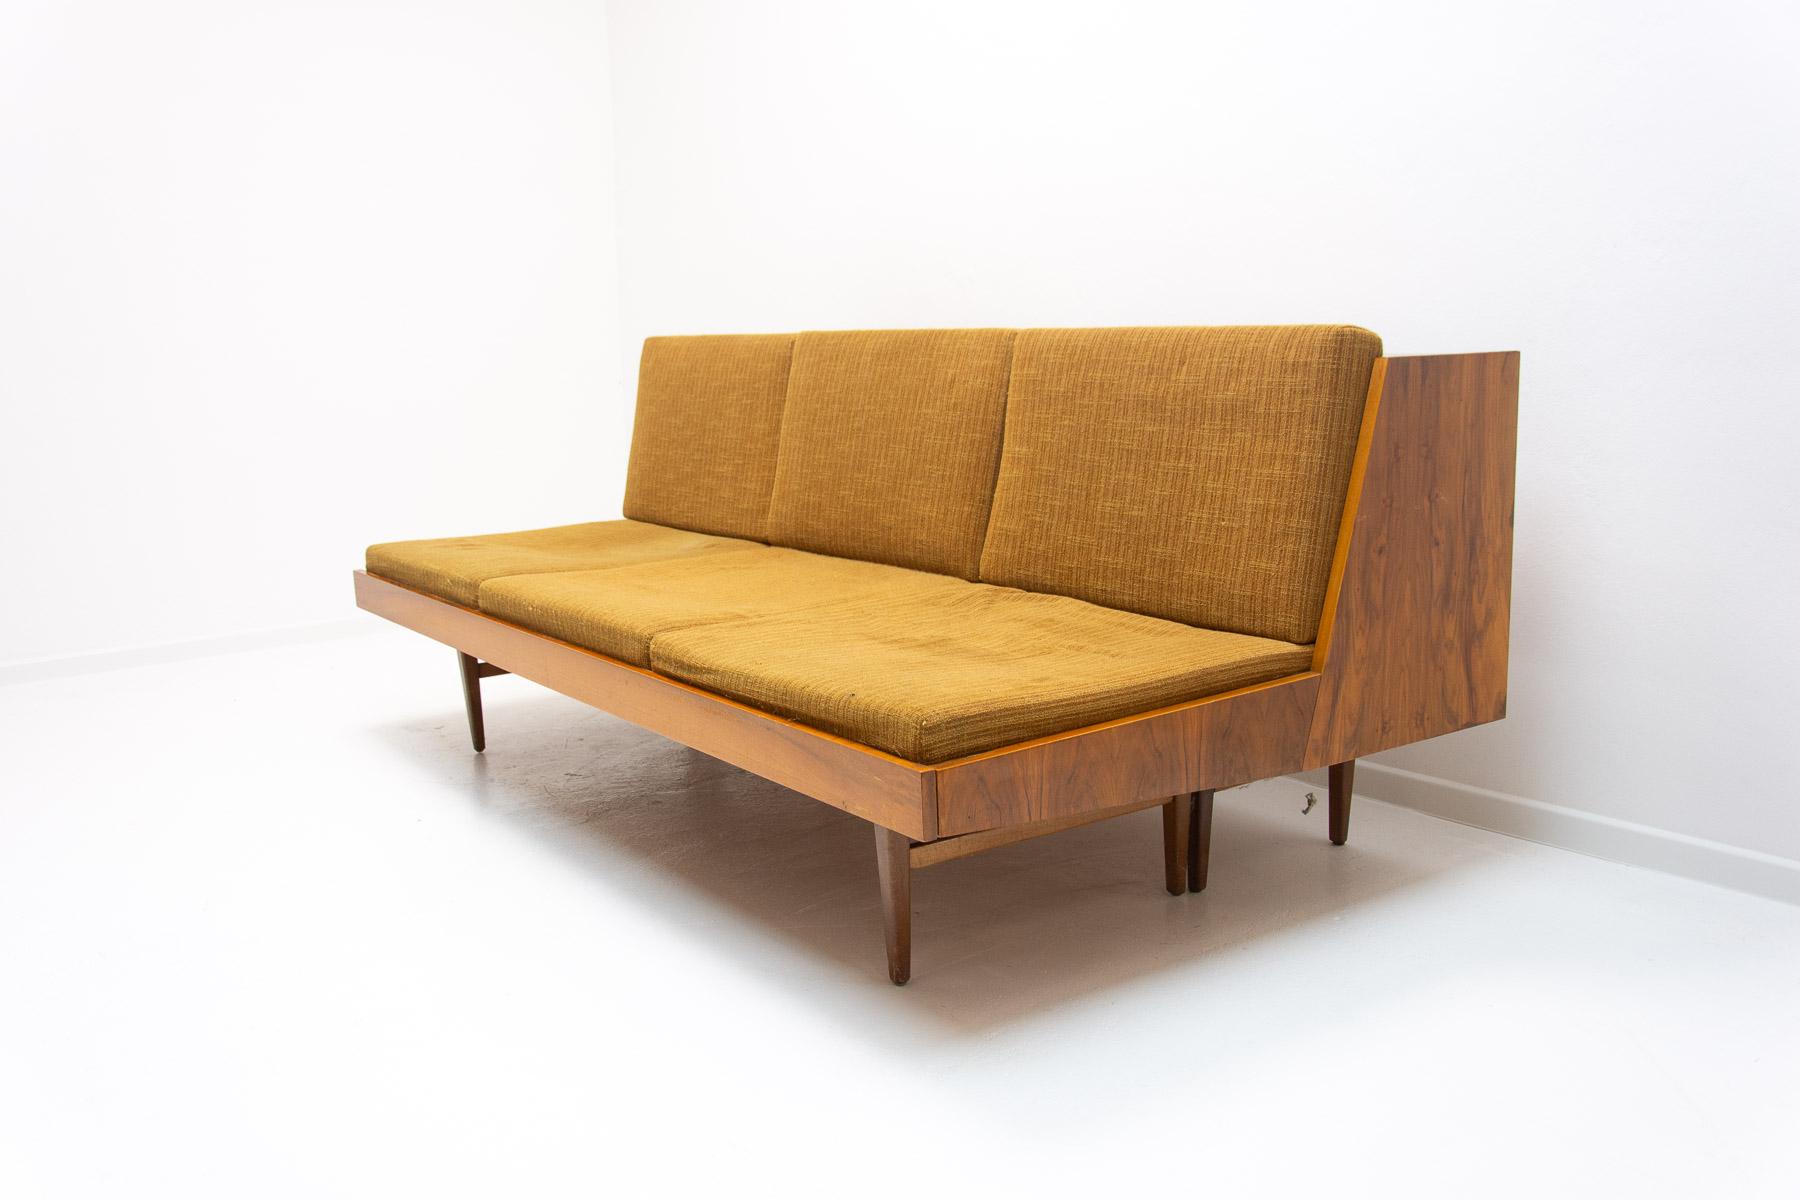 Midcentury sofa bed is made in the former Czechoslovakia in the 1970s. The sofa has a wooden structure with walnut veneer, it´s in very good condition, shows slight signs of age and using.

Lenght: 195 cm

Height: 81 cm
Depth: 102 cm

Sleeping area: